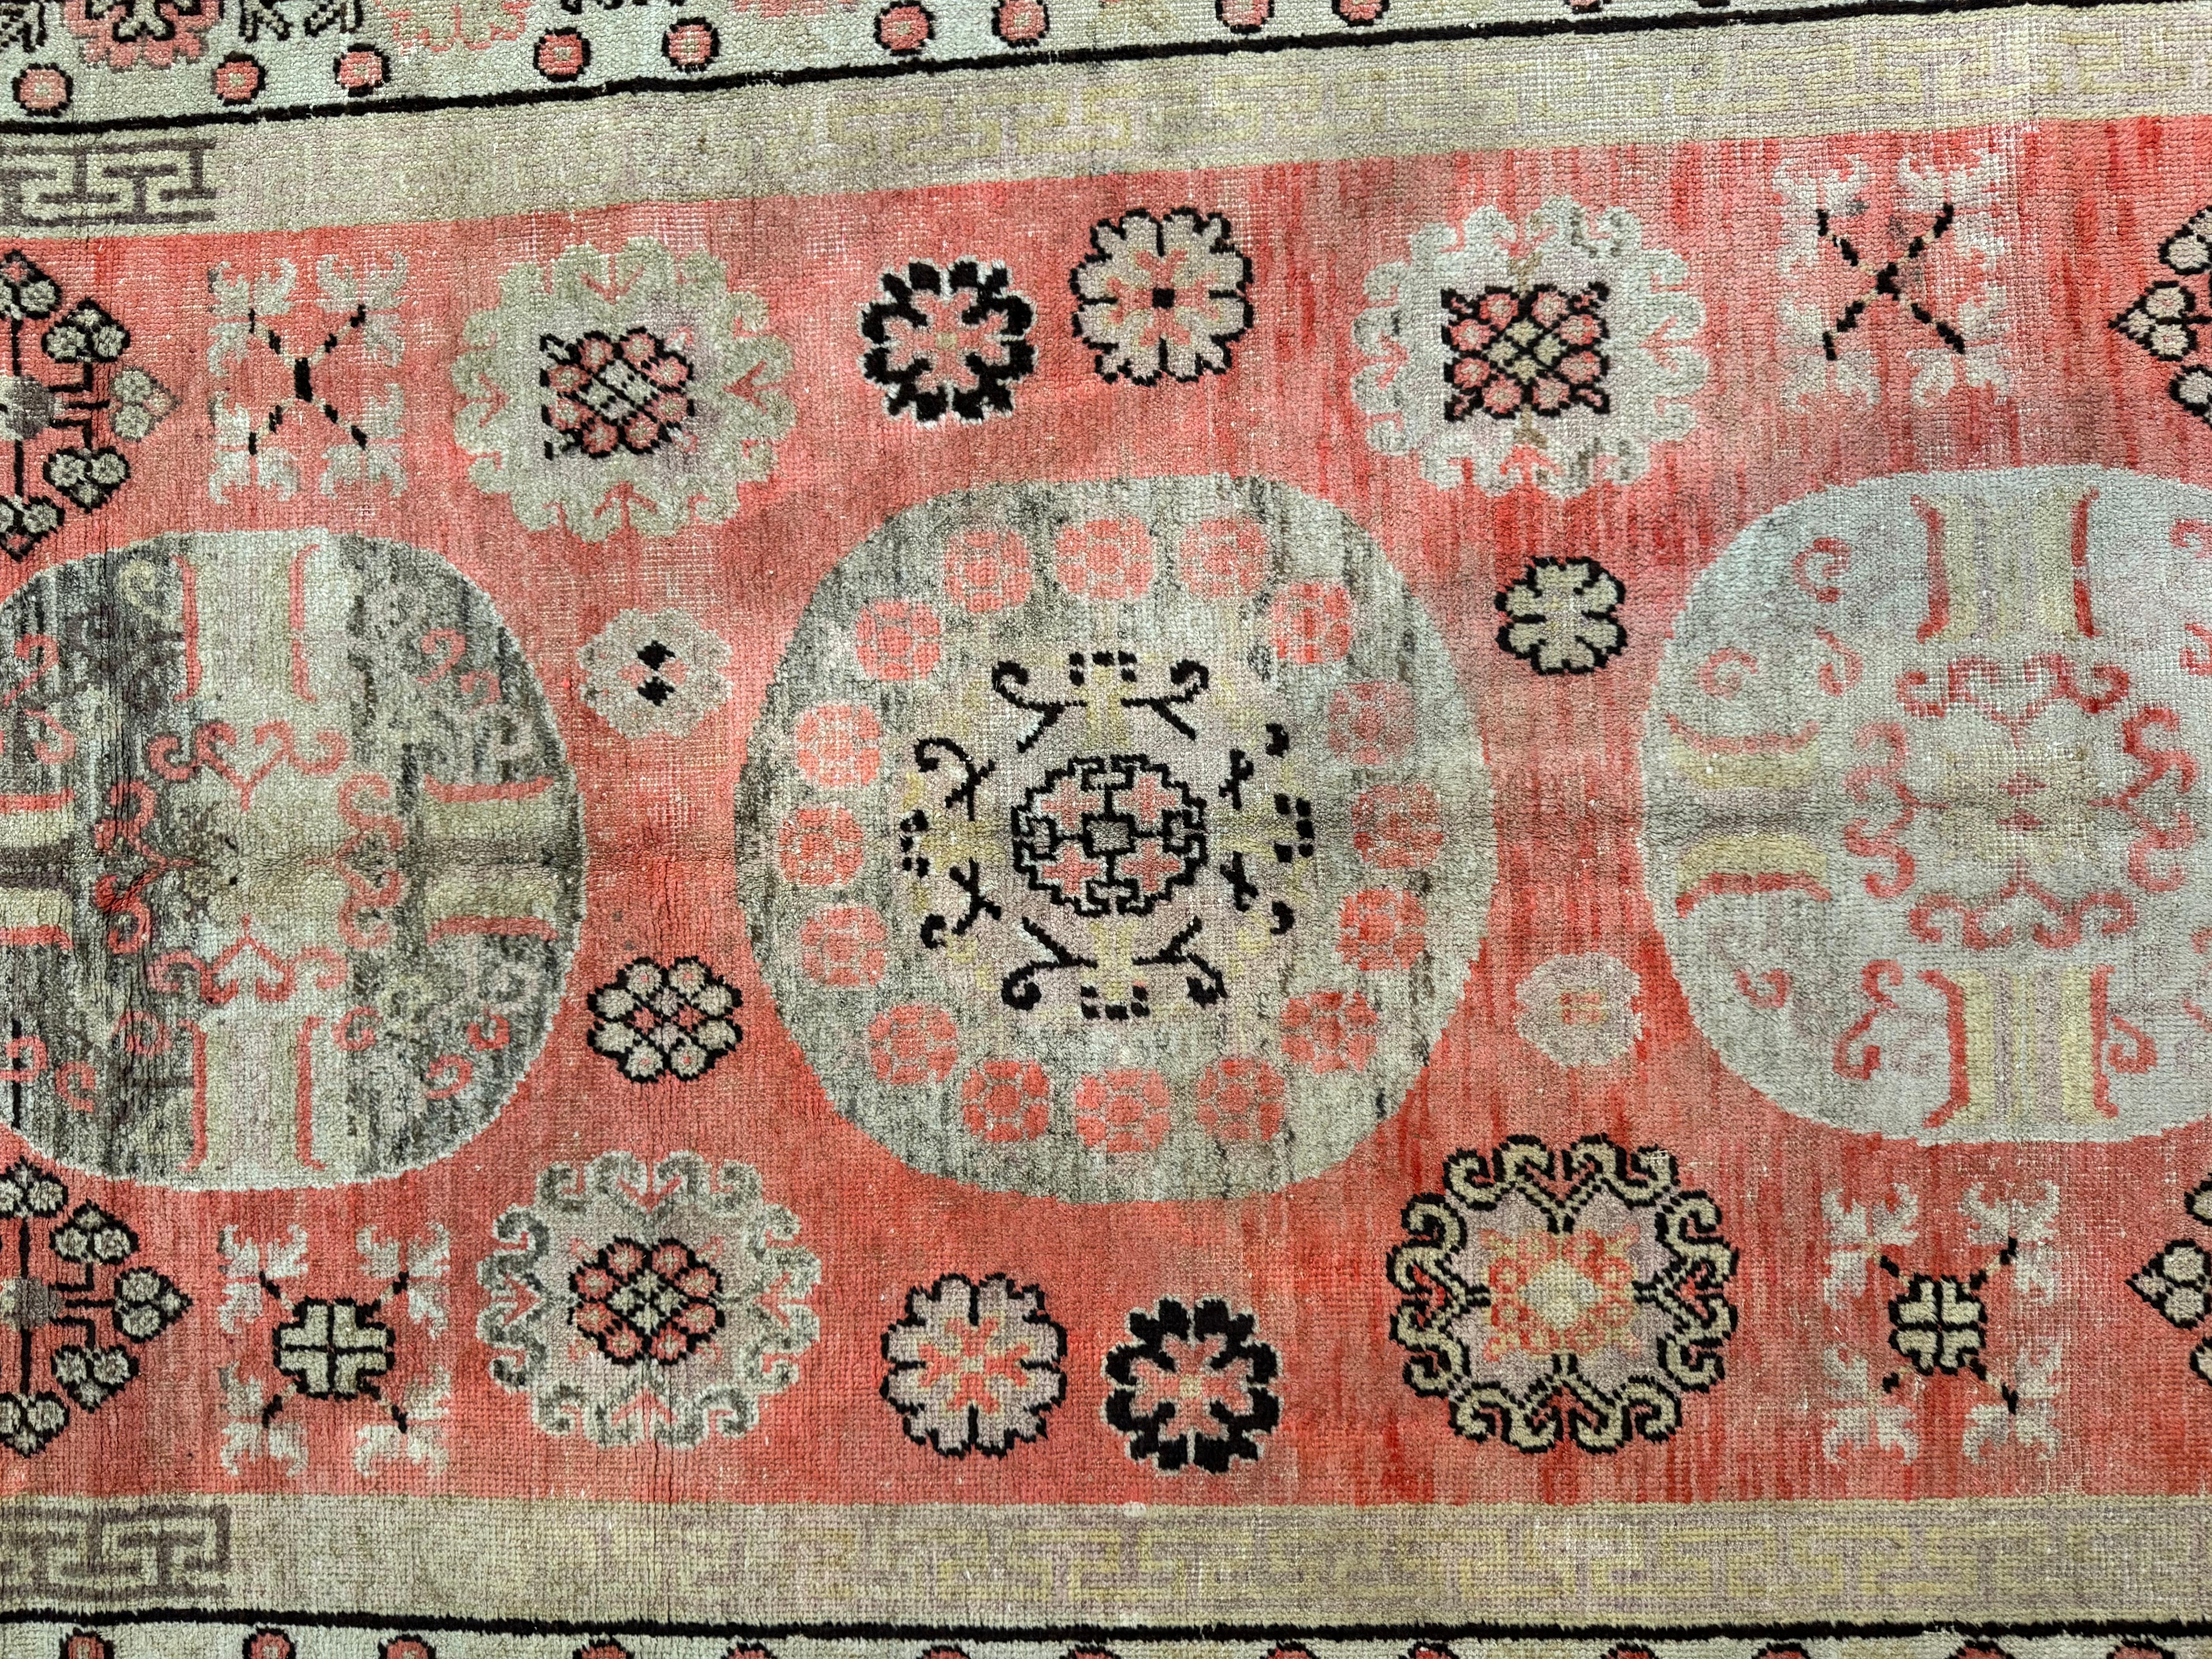 Infuse your home with classic elegance using this 19th-century Antique Samarkand Rug, sized at 9.3' x 4.7'. Its detailed motifs and timeless colors resonate with American style, merging vintage sophistication with modern appeal.